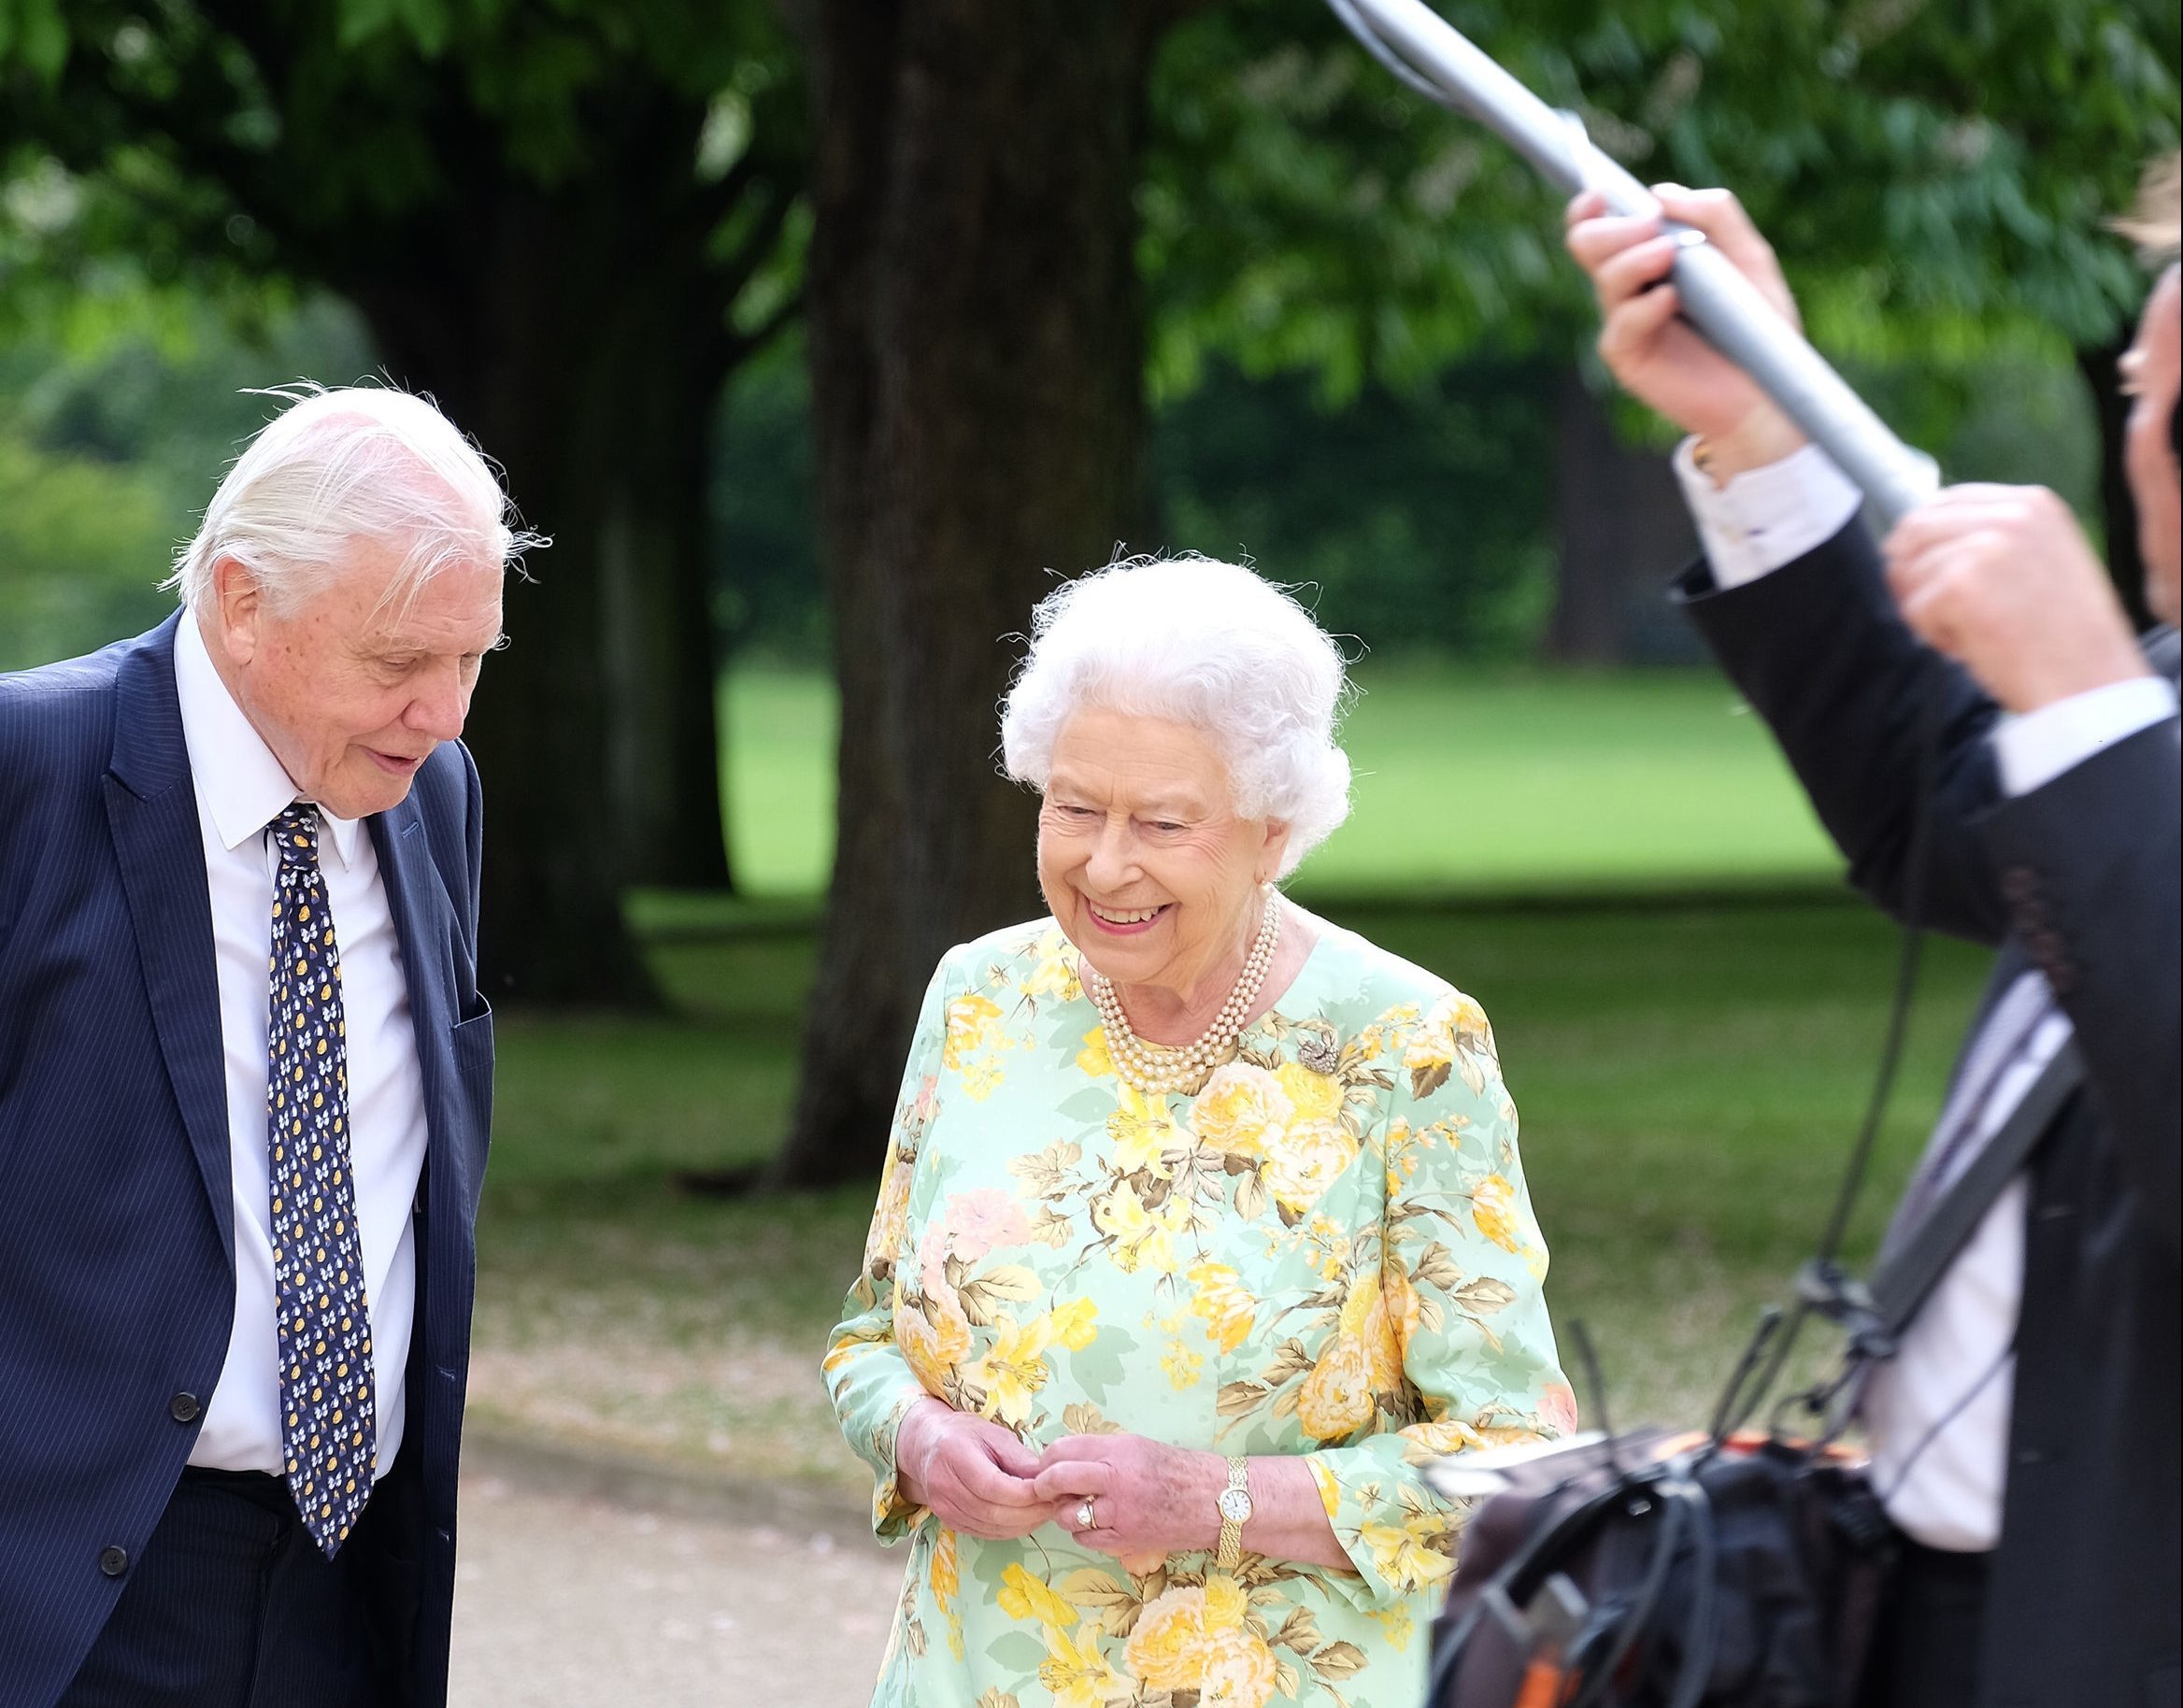 Queen Elizabeth II and Sir David Attenborough in the gardens of Buckingham Palace during filming of a landmark documentary. (ITV/PA Wire)